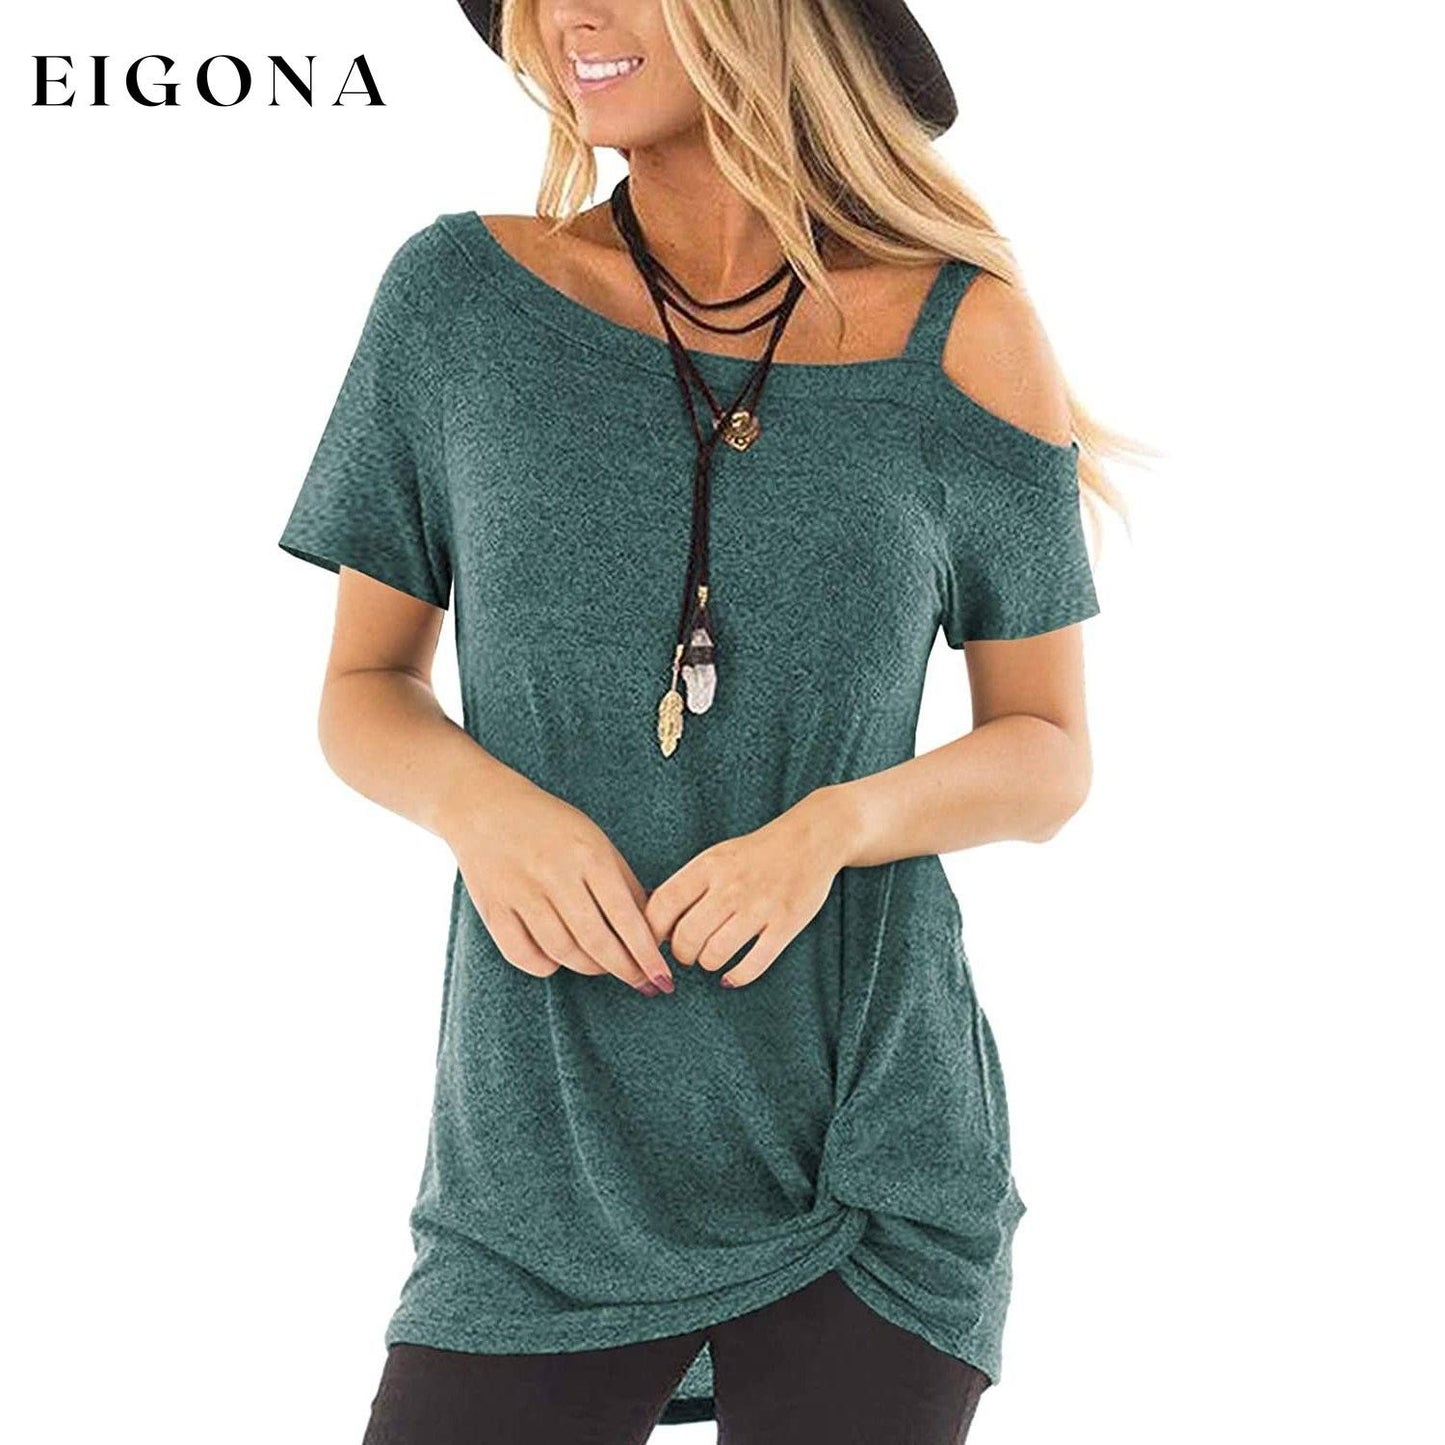 Women's Cold Shoulder Tops Summer Short Sleeve Casual Twist Knot Blouse T-Shirt Green __stock:200 clothes refund_fee:800 tops